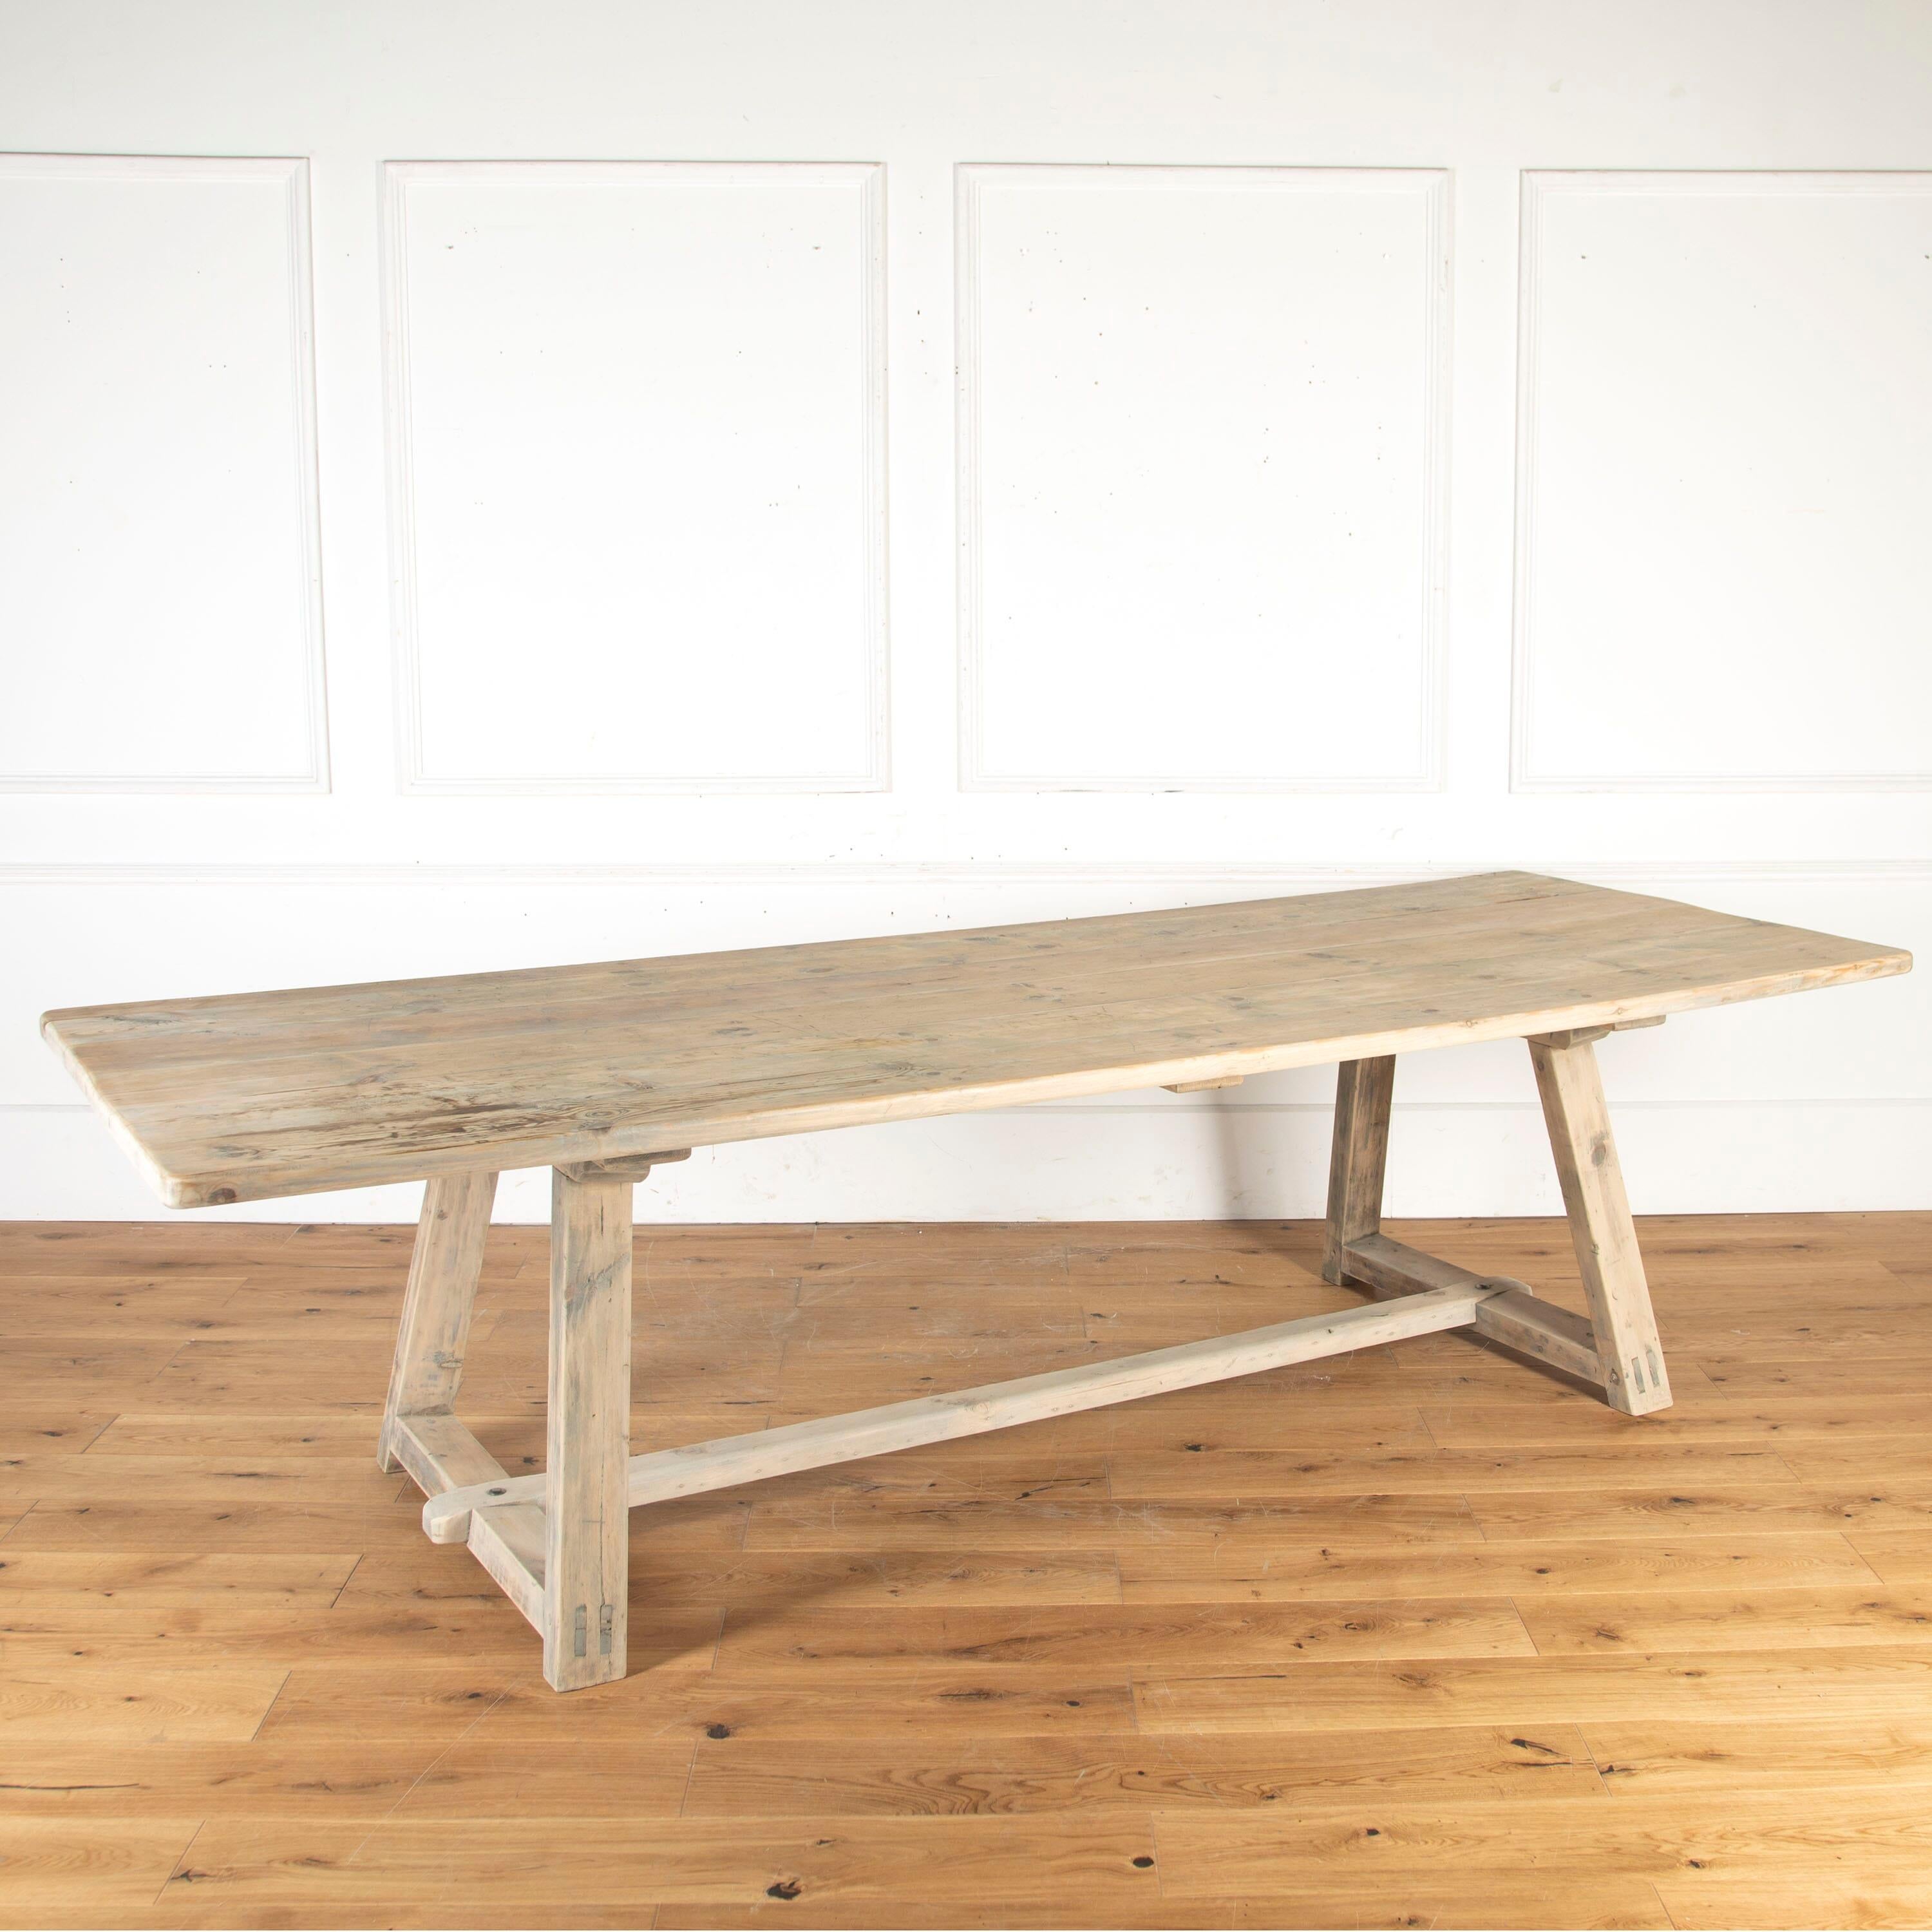 Fantastic large early 20th century French pine table, Circa 1920.

This table has been reduced in size, and would originally have been a much larger industrial table. 

Nonetheless, it is of large scale with a 4cm thick boarded top and a